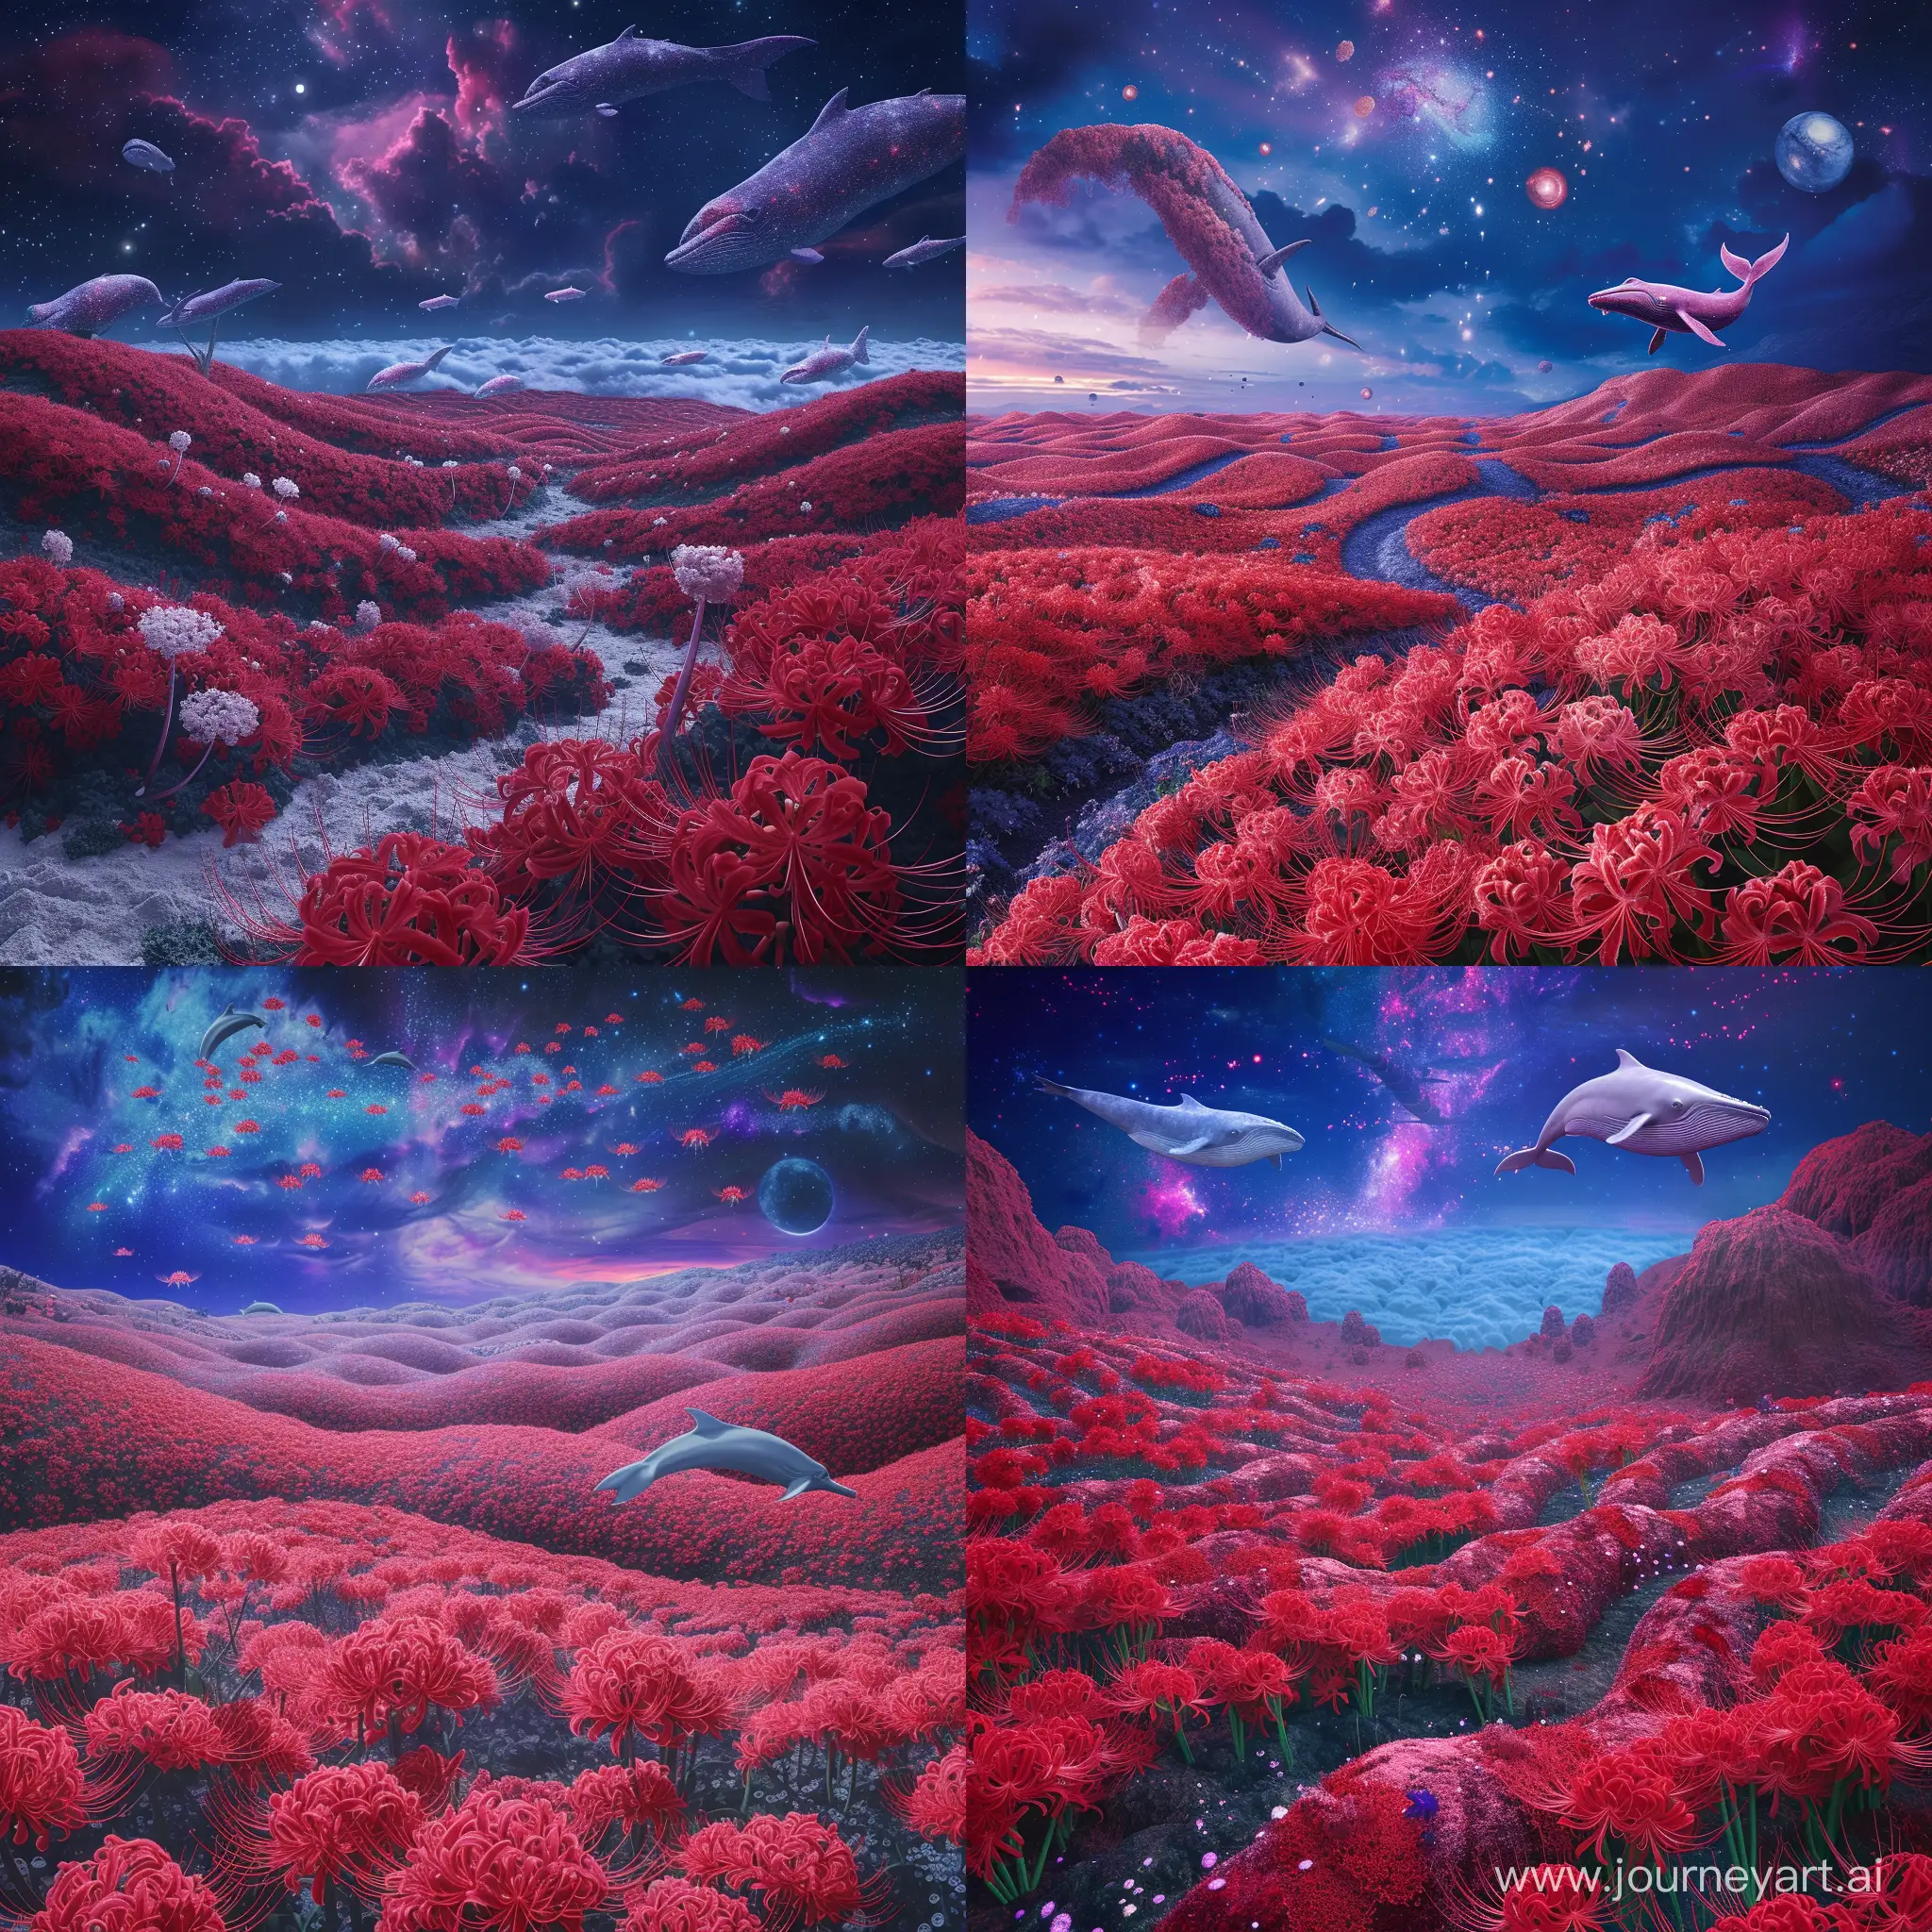 Envision a surreal, masterpiece of a scene featuring a sprawling garden blanketed in an array of vibrant, yet somber red and pink Lycoris radiata and red spider lilies. The undulating ground evokes disorientation, creating a sense of being lost in a vast, limitless world. A cold, isolation vibe resonates as the garden is drenched in a deep, bloody red theme, exuding a profound sadness that captures the feeling of sickness and dying inside of nature. The sky above is a deep midnight blue, adorned with cosmic elements that create an otherworldly beauty. Magnificent, enormous celestial bodies shimmer in captivating shades of beautiful purples and indigos, imparting a high cosmical element that adds to the surrealism of the scene, in the sky majestic floating enormous whales are crossing the sky, adding a touch of whimsy and surrealism to the already mesmerizing masterpiece --q 4